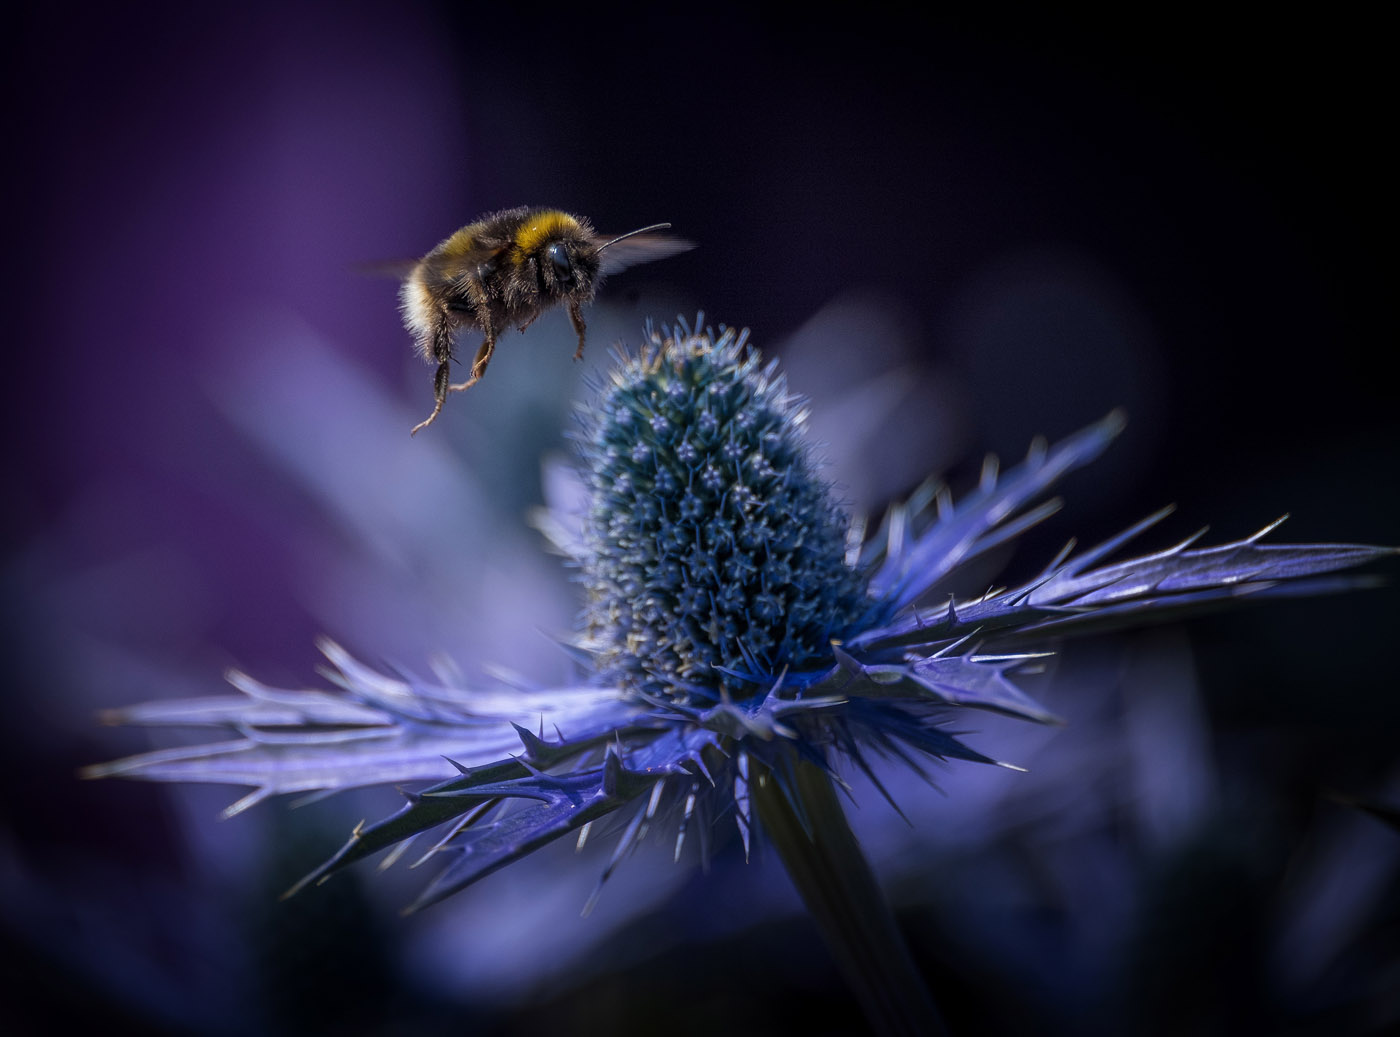 1st place Busybee by Phil Robson